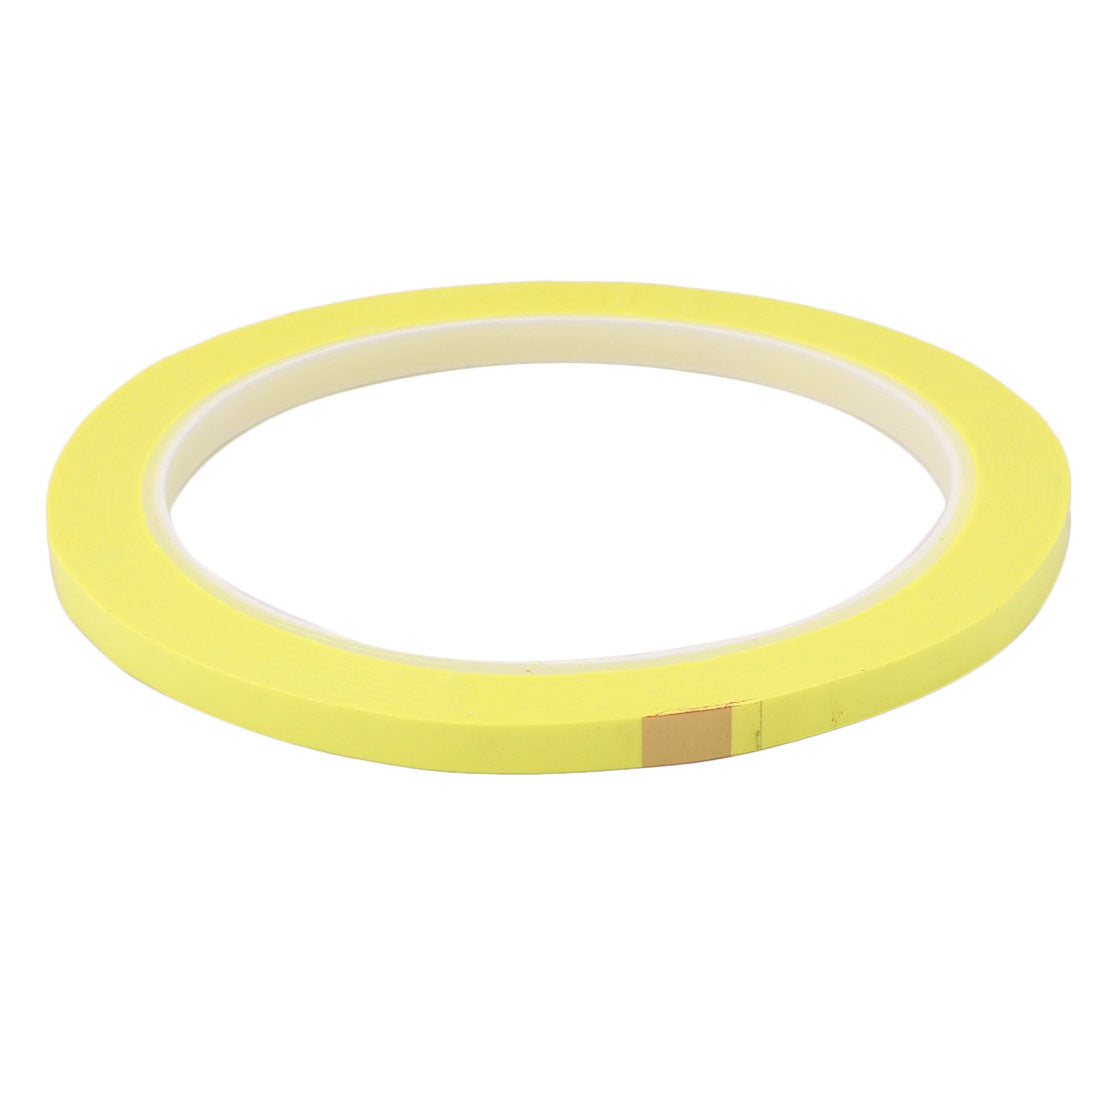 uxcell Uxcell 5 Pcs 5mm Single Sided Strong Self Adhesive Mylar Tape 50M Length Yellow